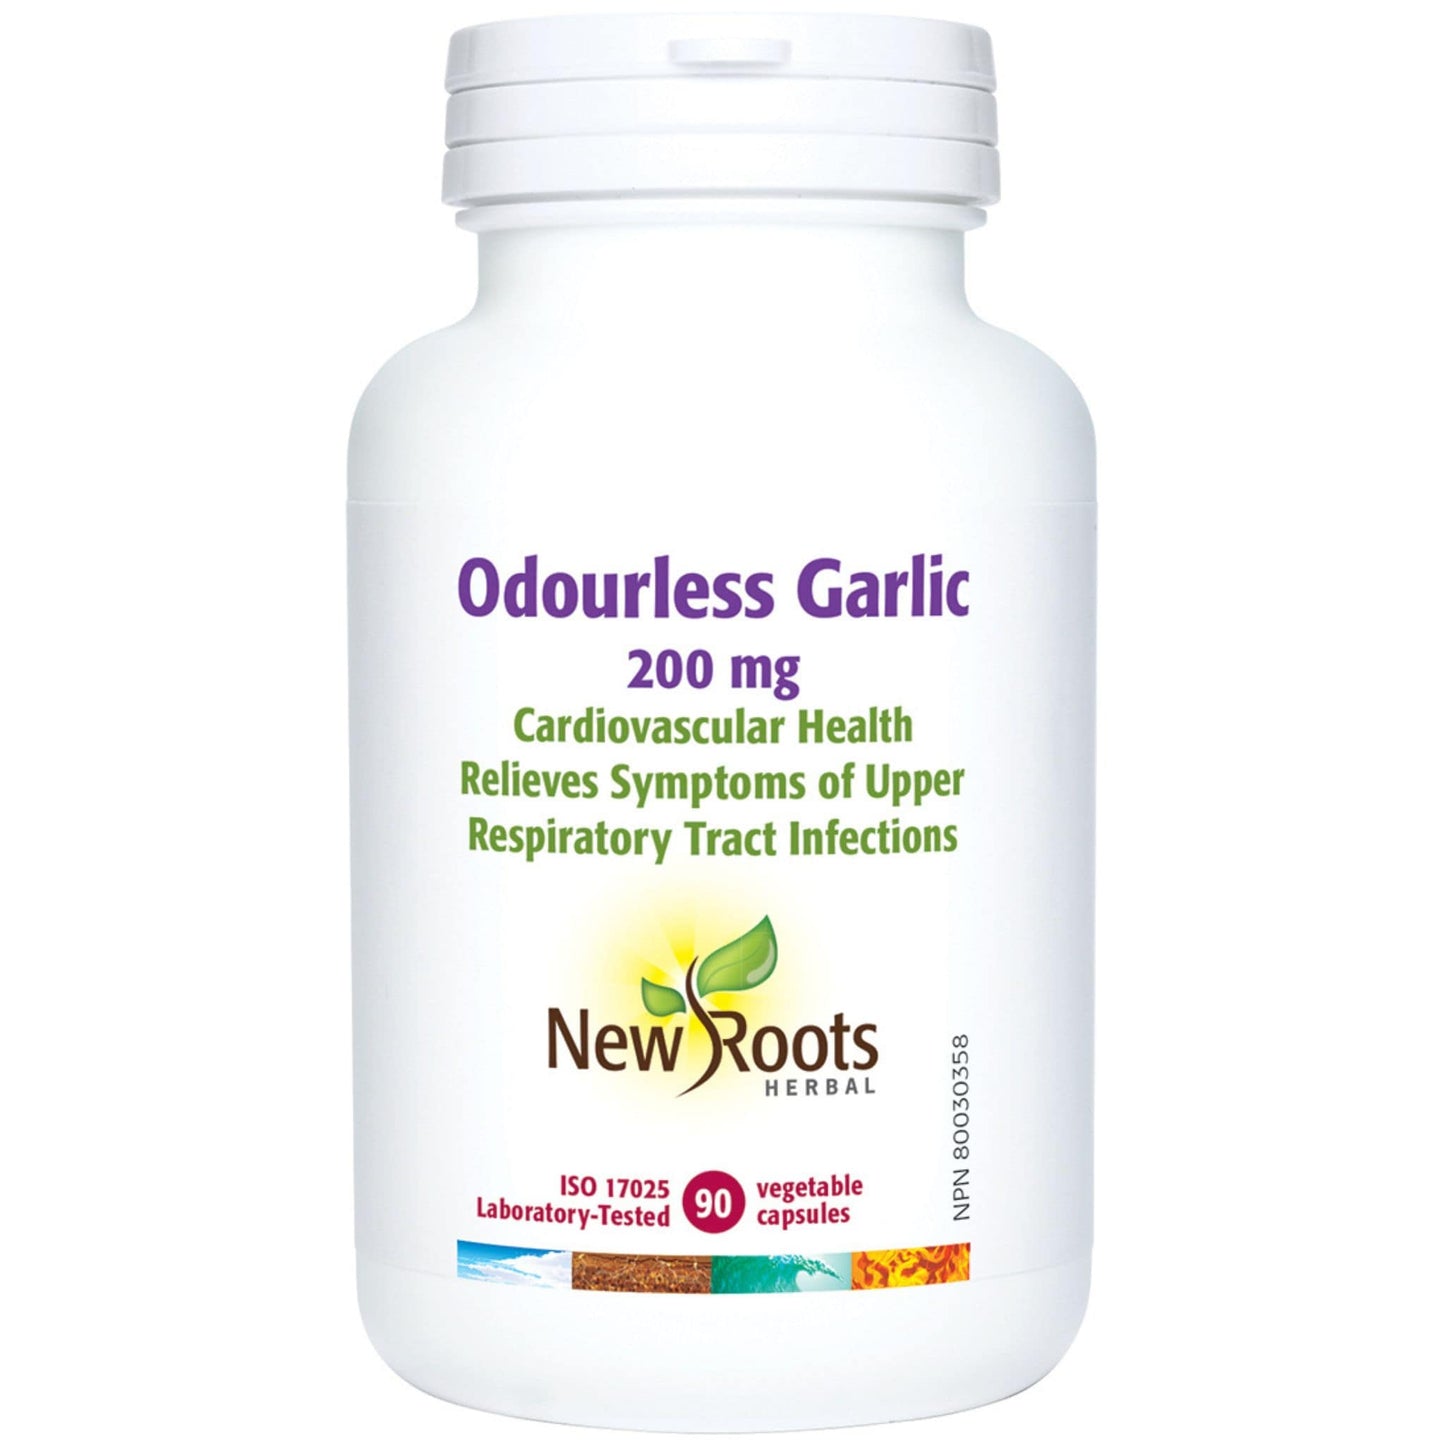 New Roots Odourless Garlic 200mg, 90 Capsules